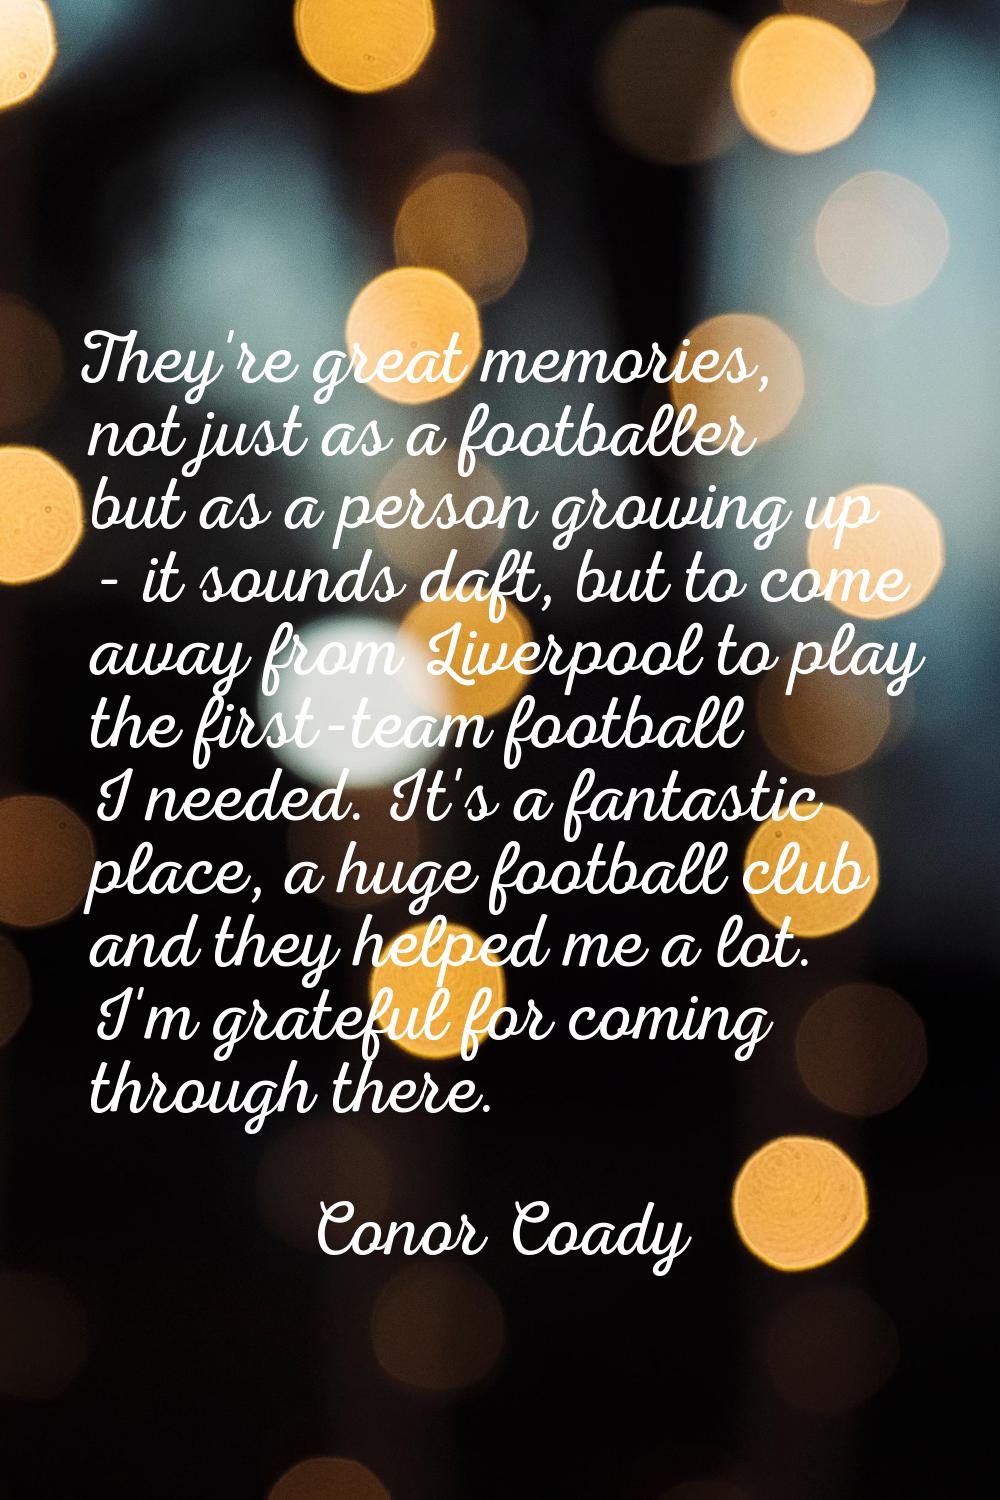 They're great memories, not just as a footballer but as a person growing up - it sounds daft, but t